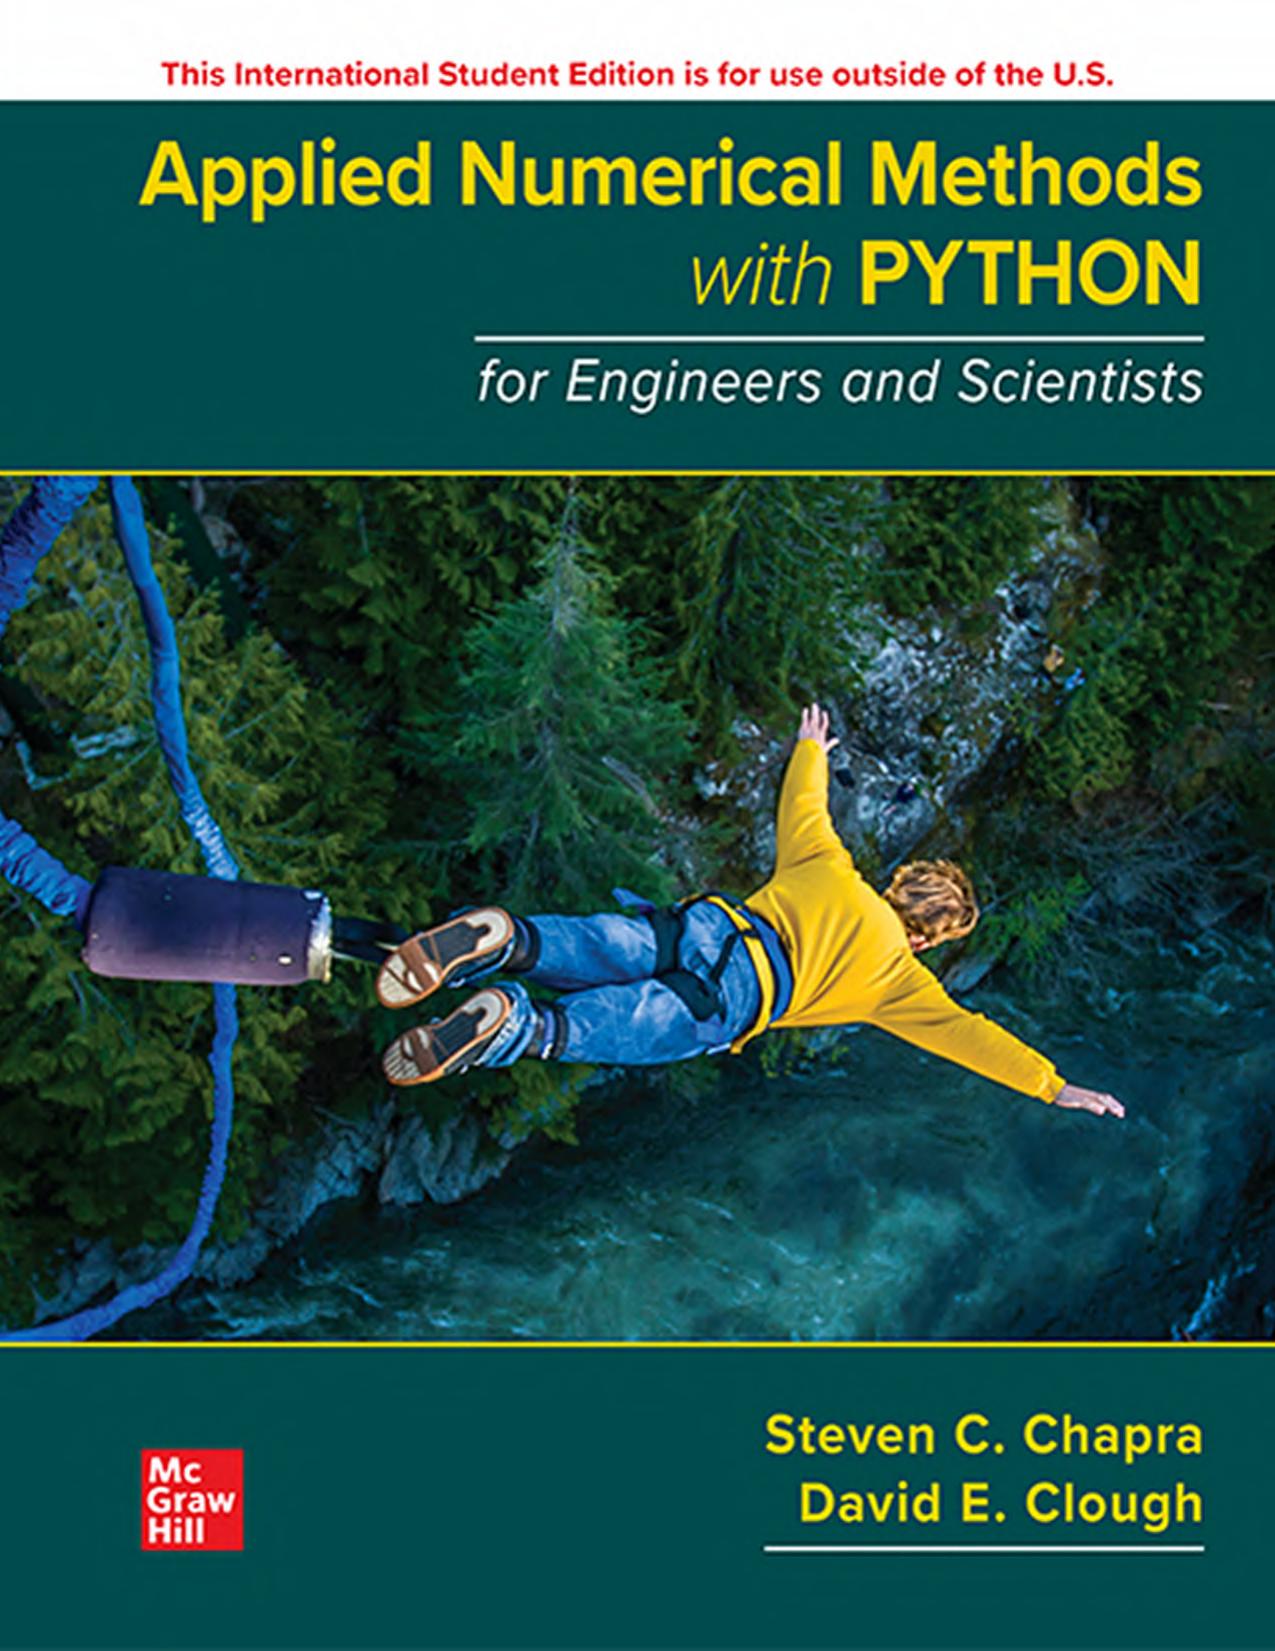 Ise Ebook Online Access for Applied Numerical Methods with Python for Engineers and Scientists by ChapraSteven;